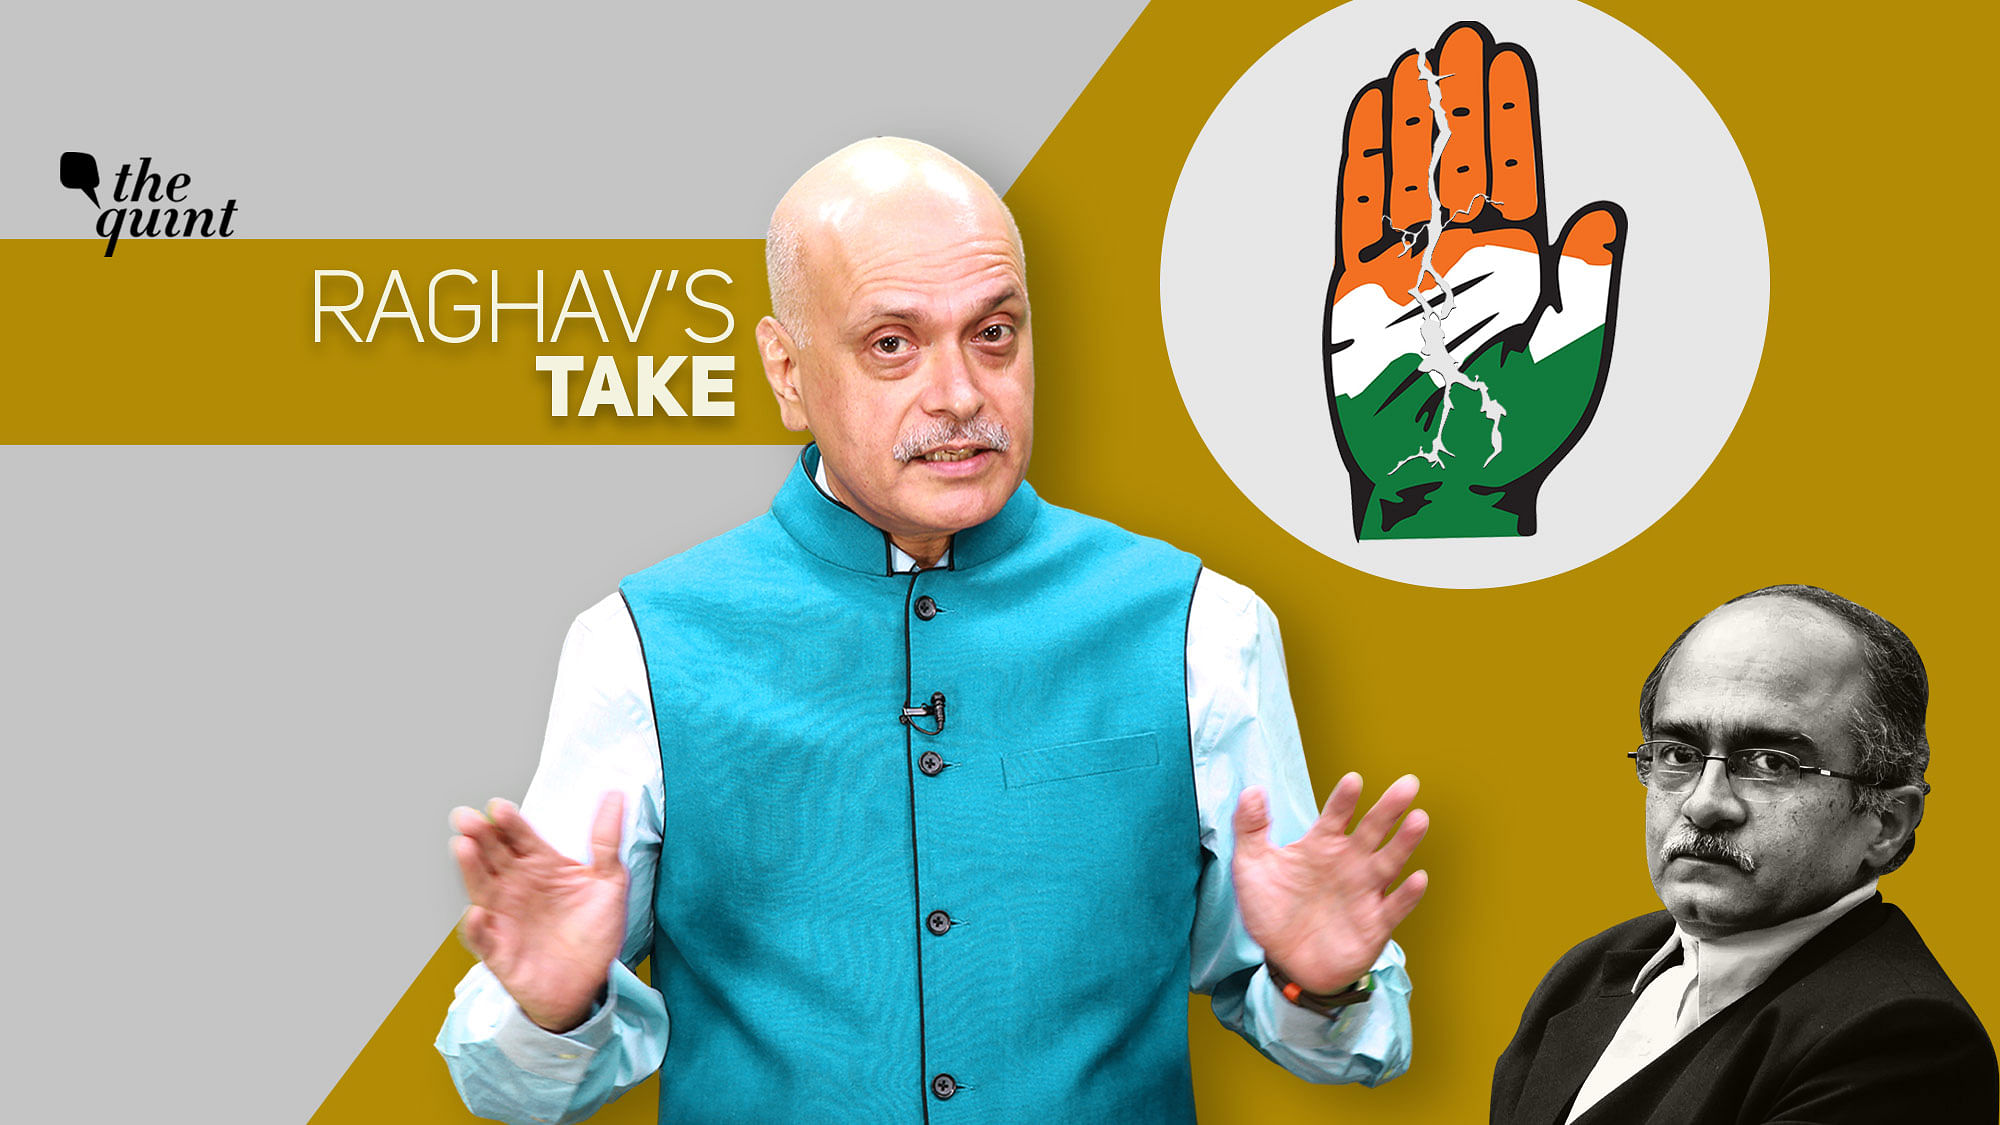 Image of The Quint’s Founder-Editor Raghav Bahl (Centre); Senior Advocate Prashant Bhushan (bottom right); artist’s impression of strife within the Congress party (top right) used for representational purposes.